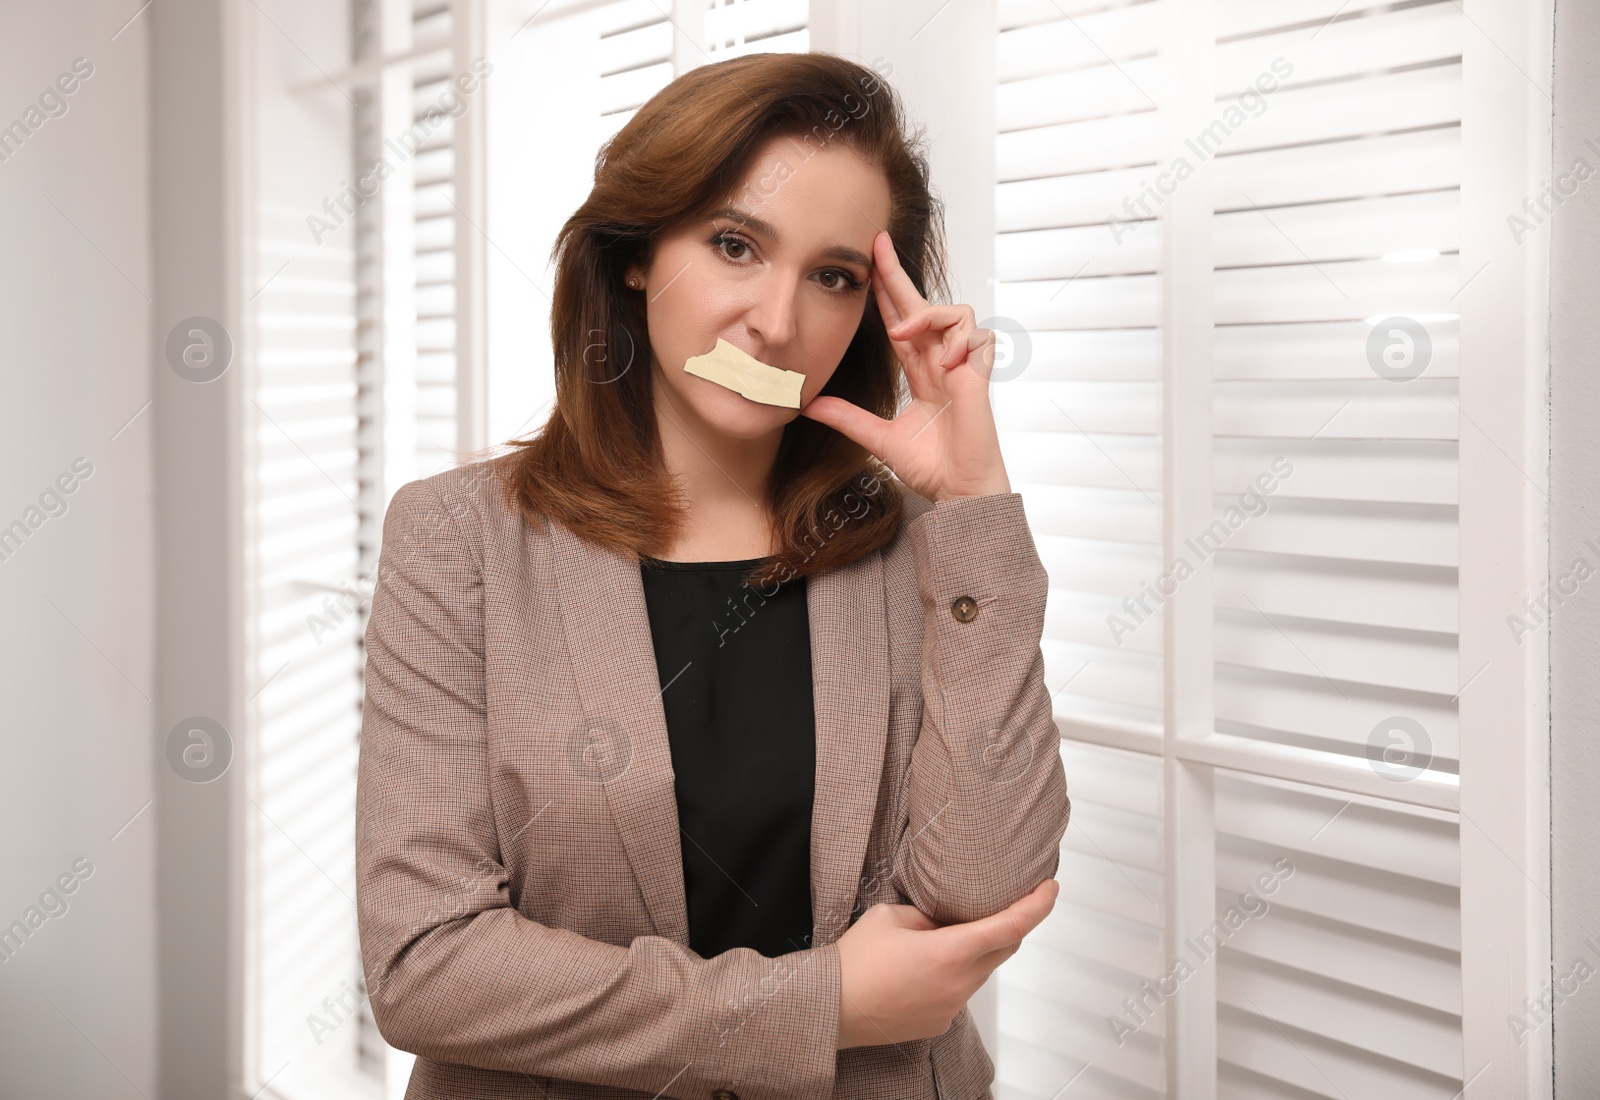 Image of Mature woman with taped mouth in office. Speech censorship